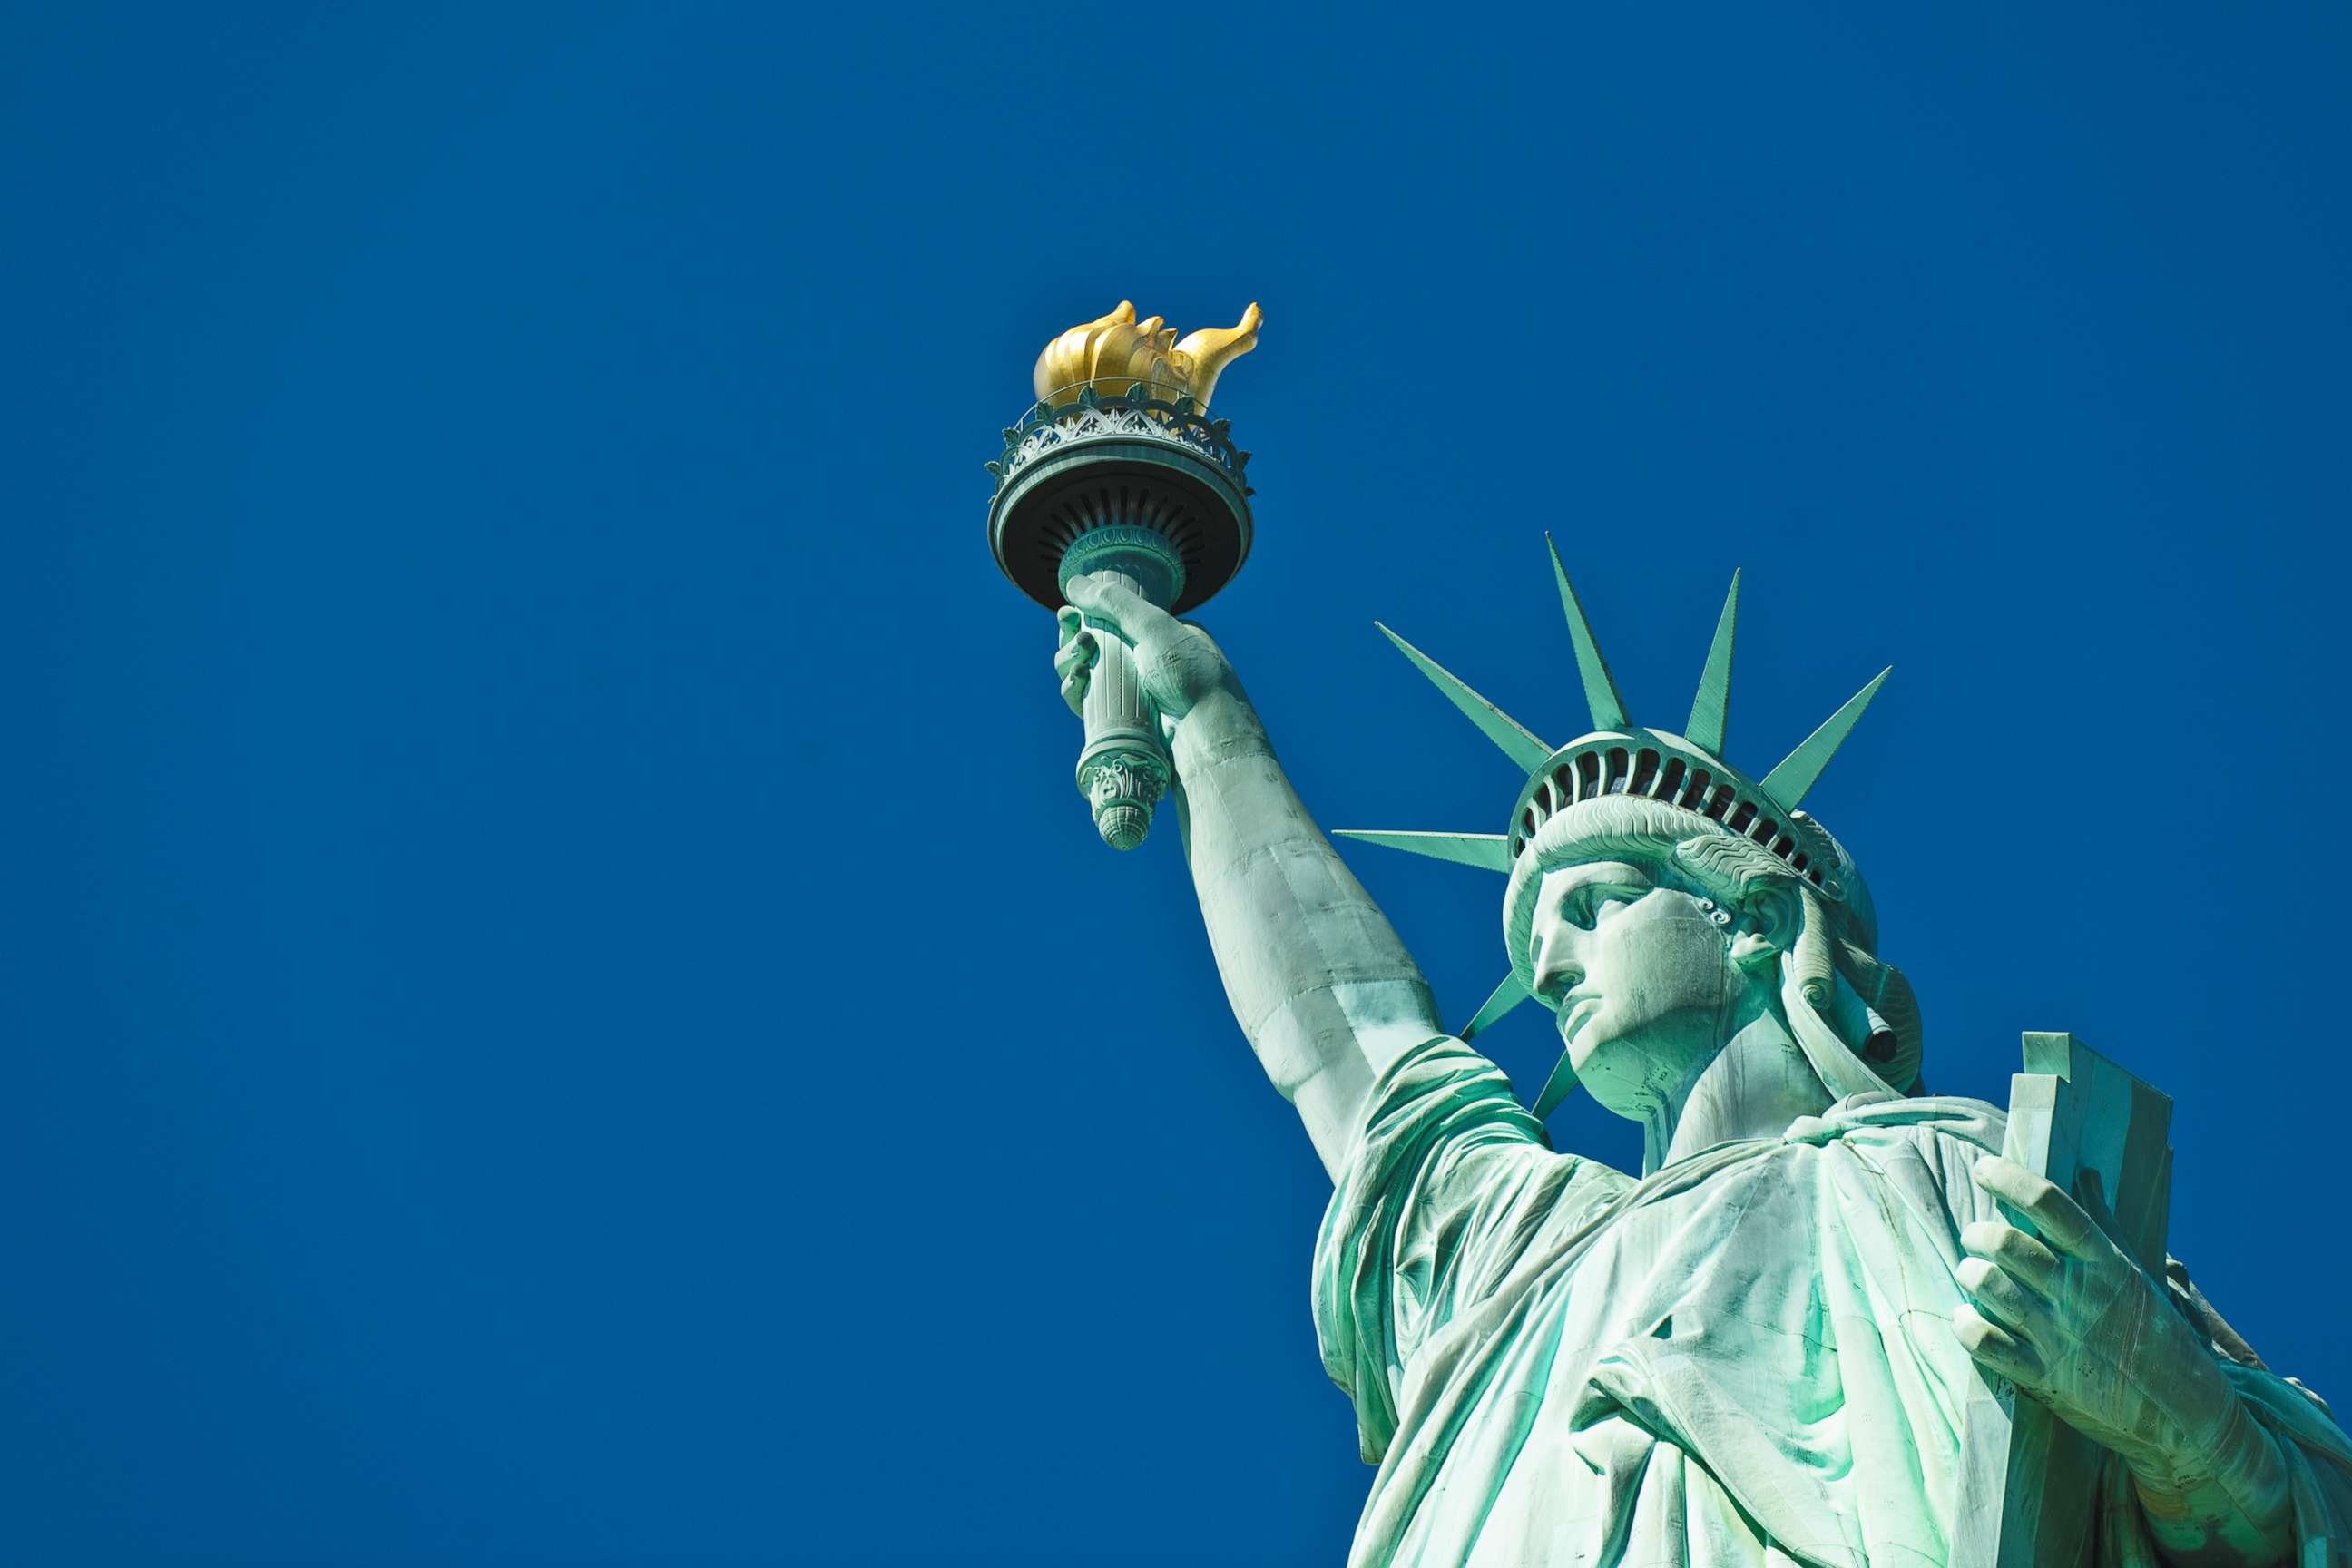 Statue of Liberty history: A beacon of freedom